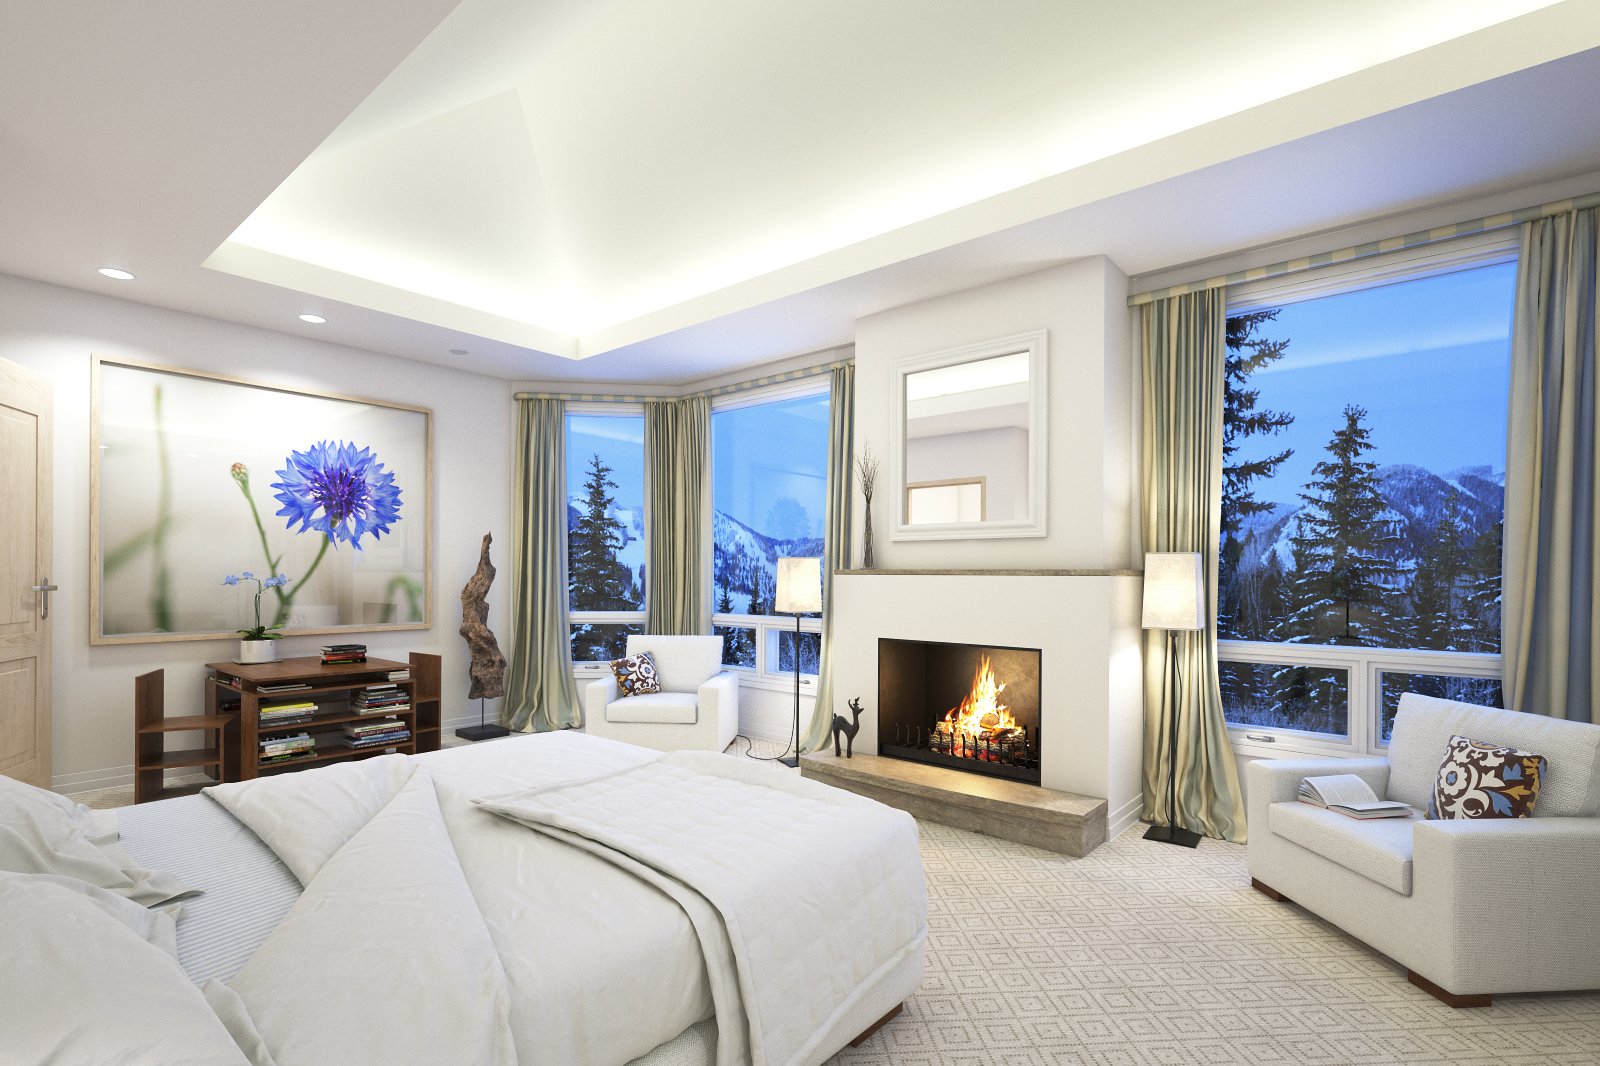 Show Me Fireplaces Inspirational Making Of A Bedroom with Fireplace Tip Of the Week